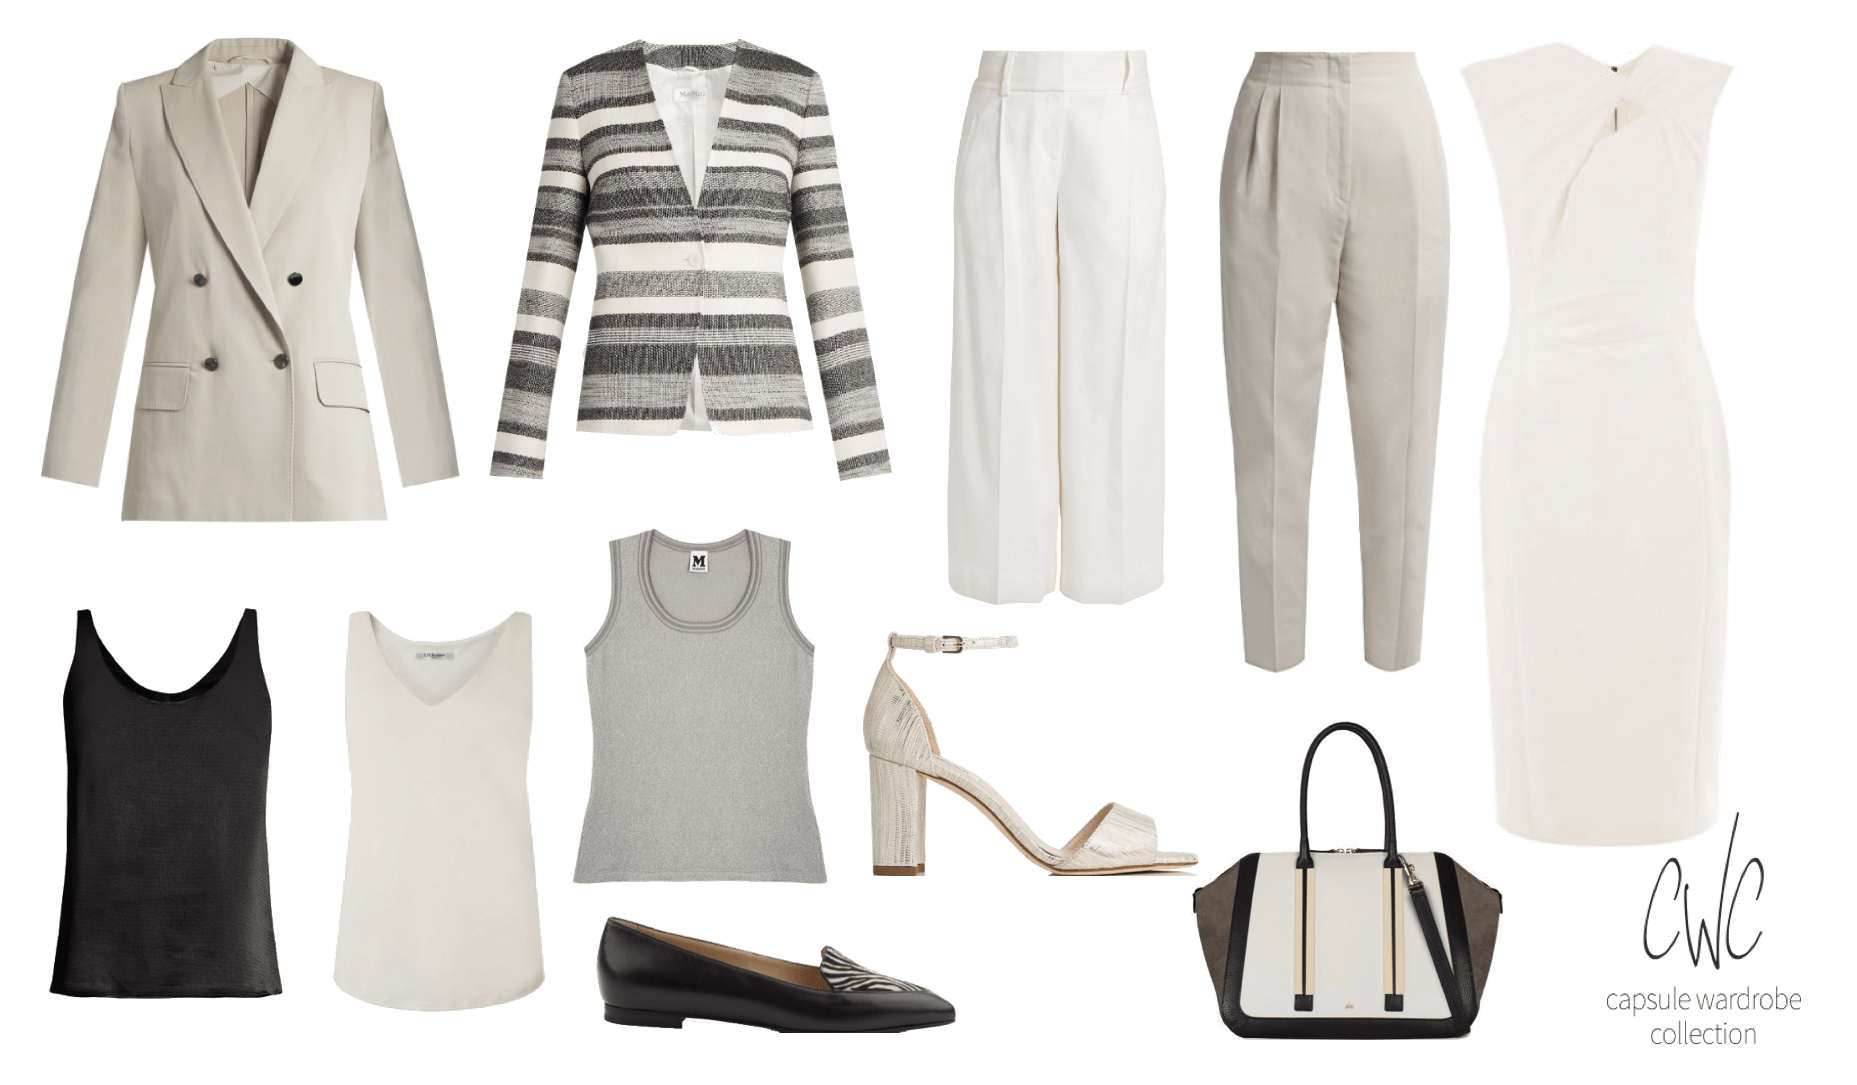 Flexible Summer Business Capsule Wardrobe for women from Capsule Wardrobe Collection